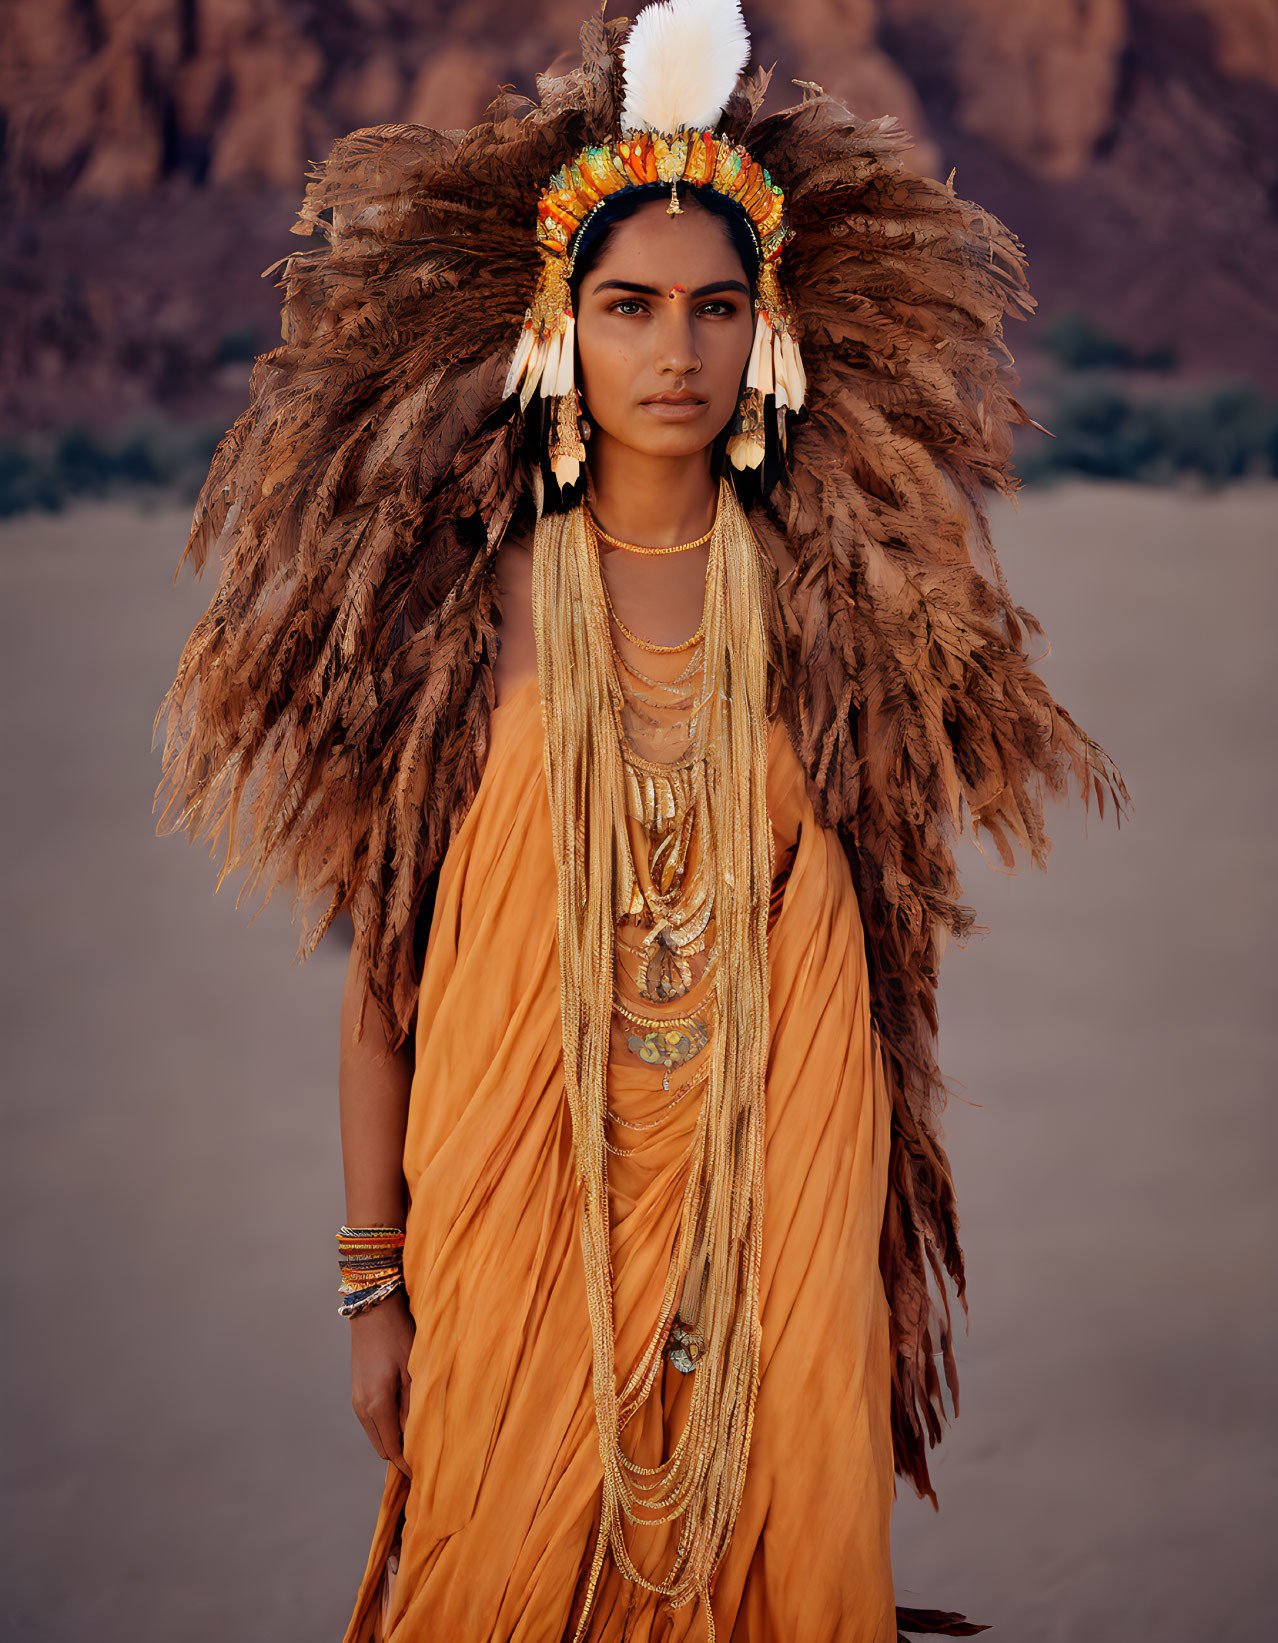 Person in ornate feather headdress and orange garments with gold jewelry in desert landscape